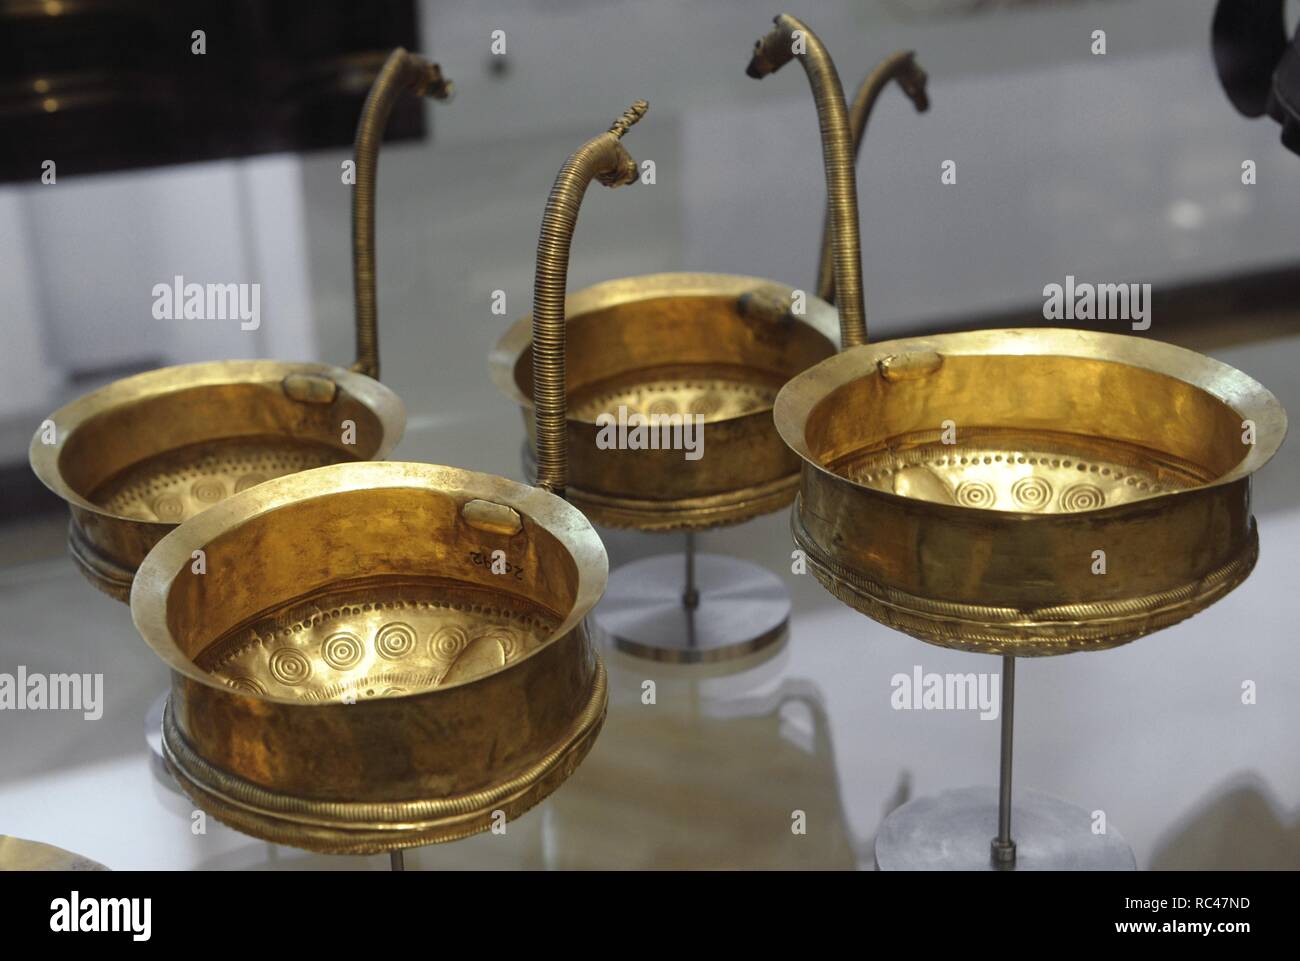 Art. Prehistory. Metal Age. Golden bowls, most with handle shaped like horses' heads, from an imported bronze vessel decorated with sun ships.  De Bog Mariesminde, Funen. 10th-6th Centuries BC. National Museum of Denmark. Copenhagen. Stock Photo